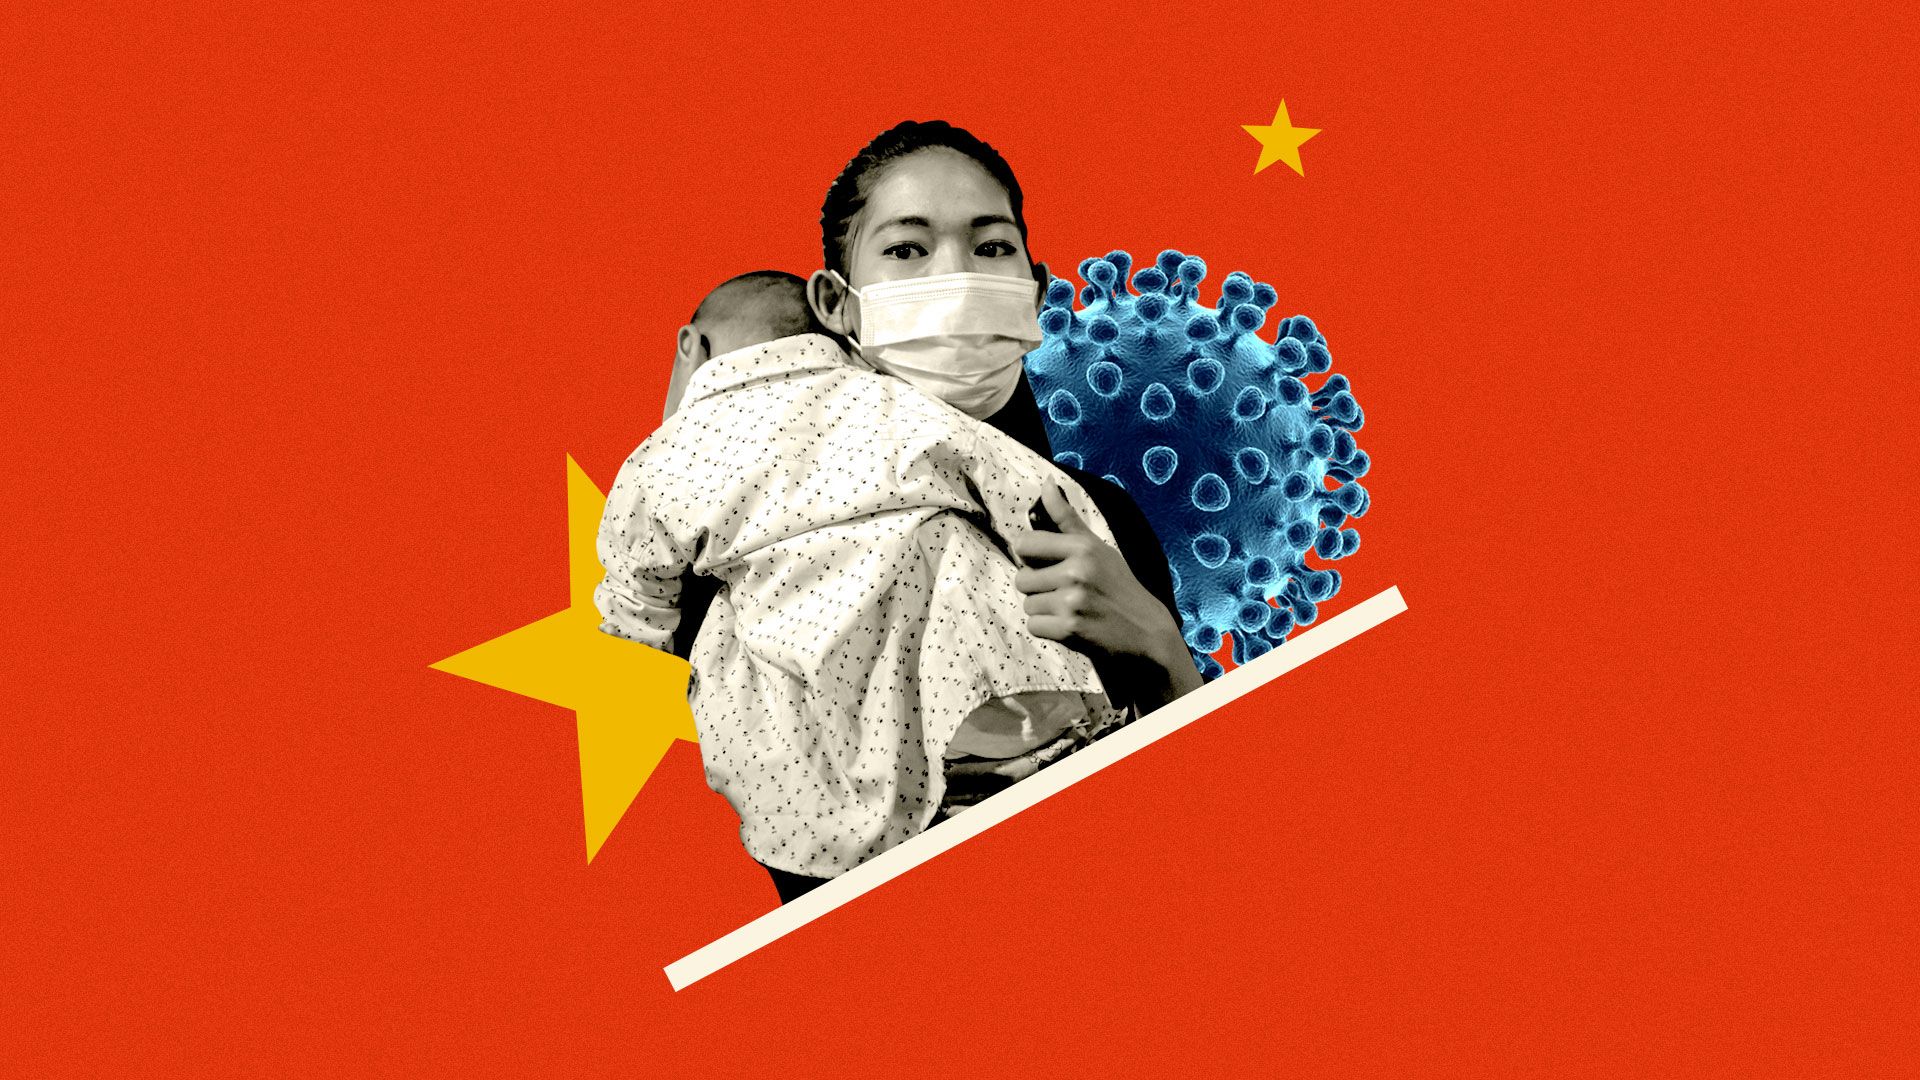 Photo illustration of a woman with a face mask holding a child. A Coronavirus is behind her.